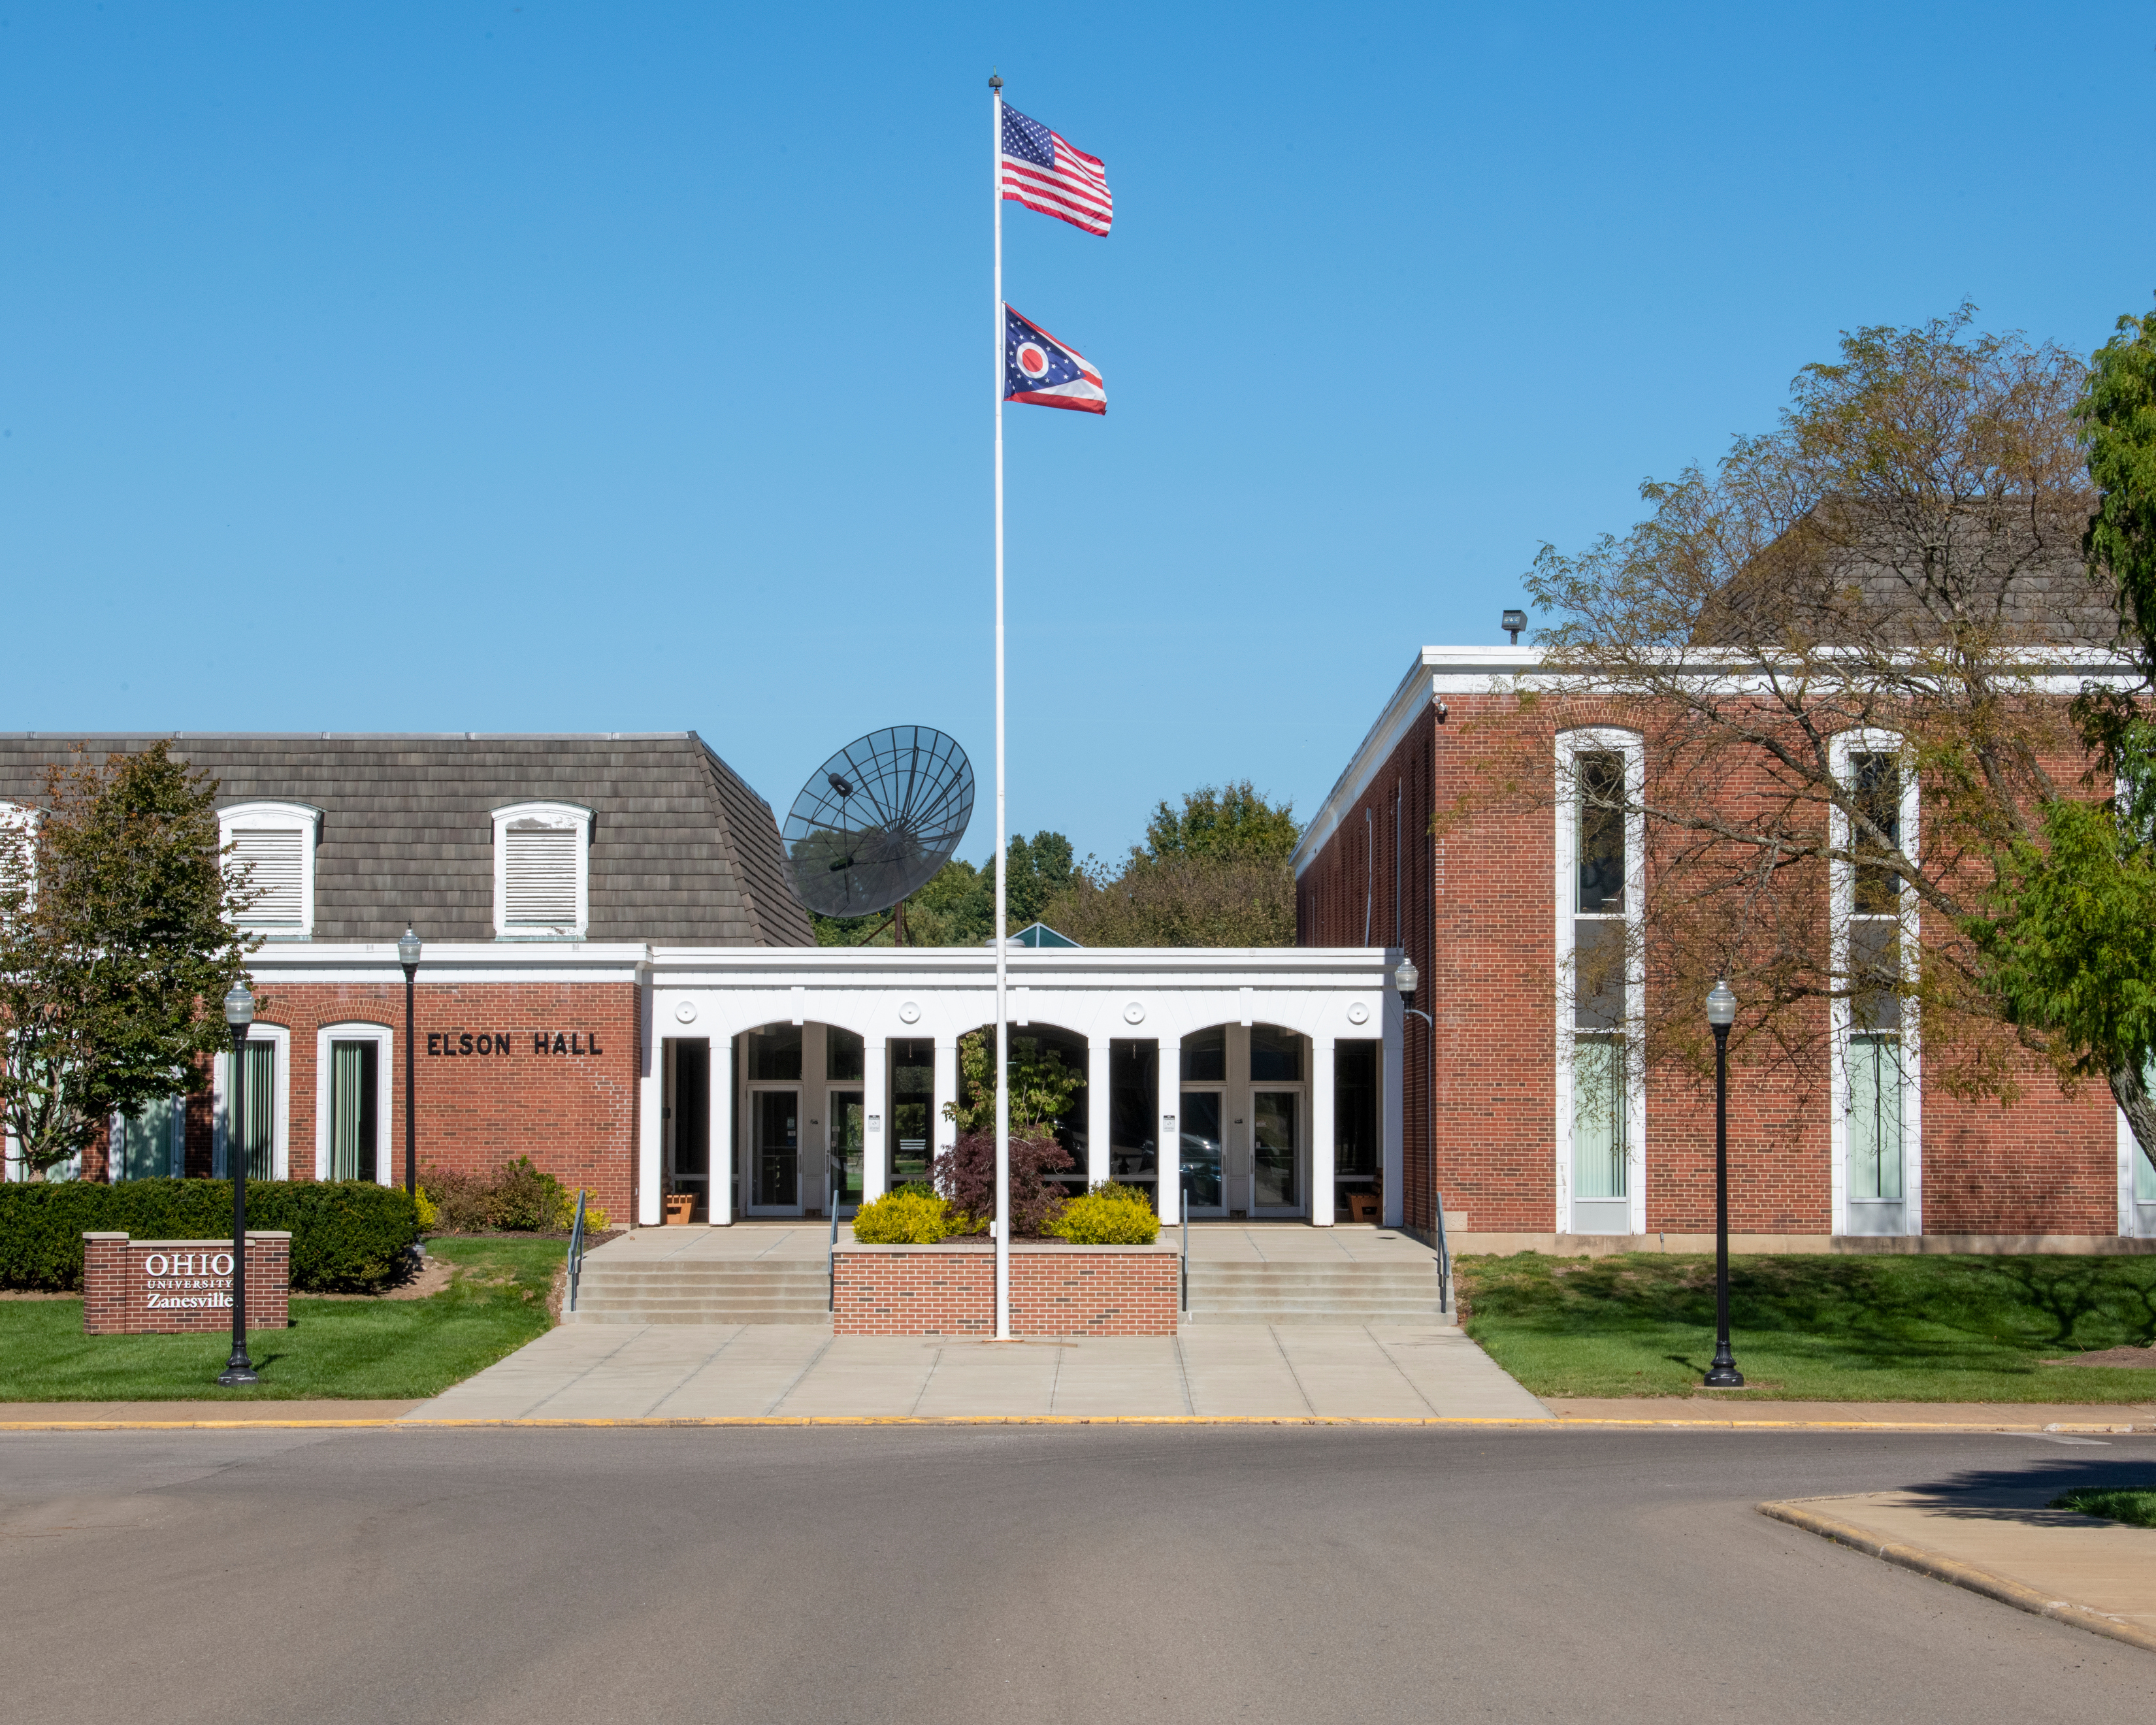 An image of Elson hall. A orange brick building with a white trim overhang entrance.